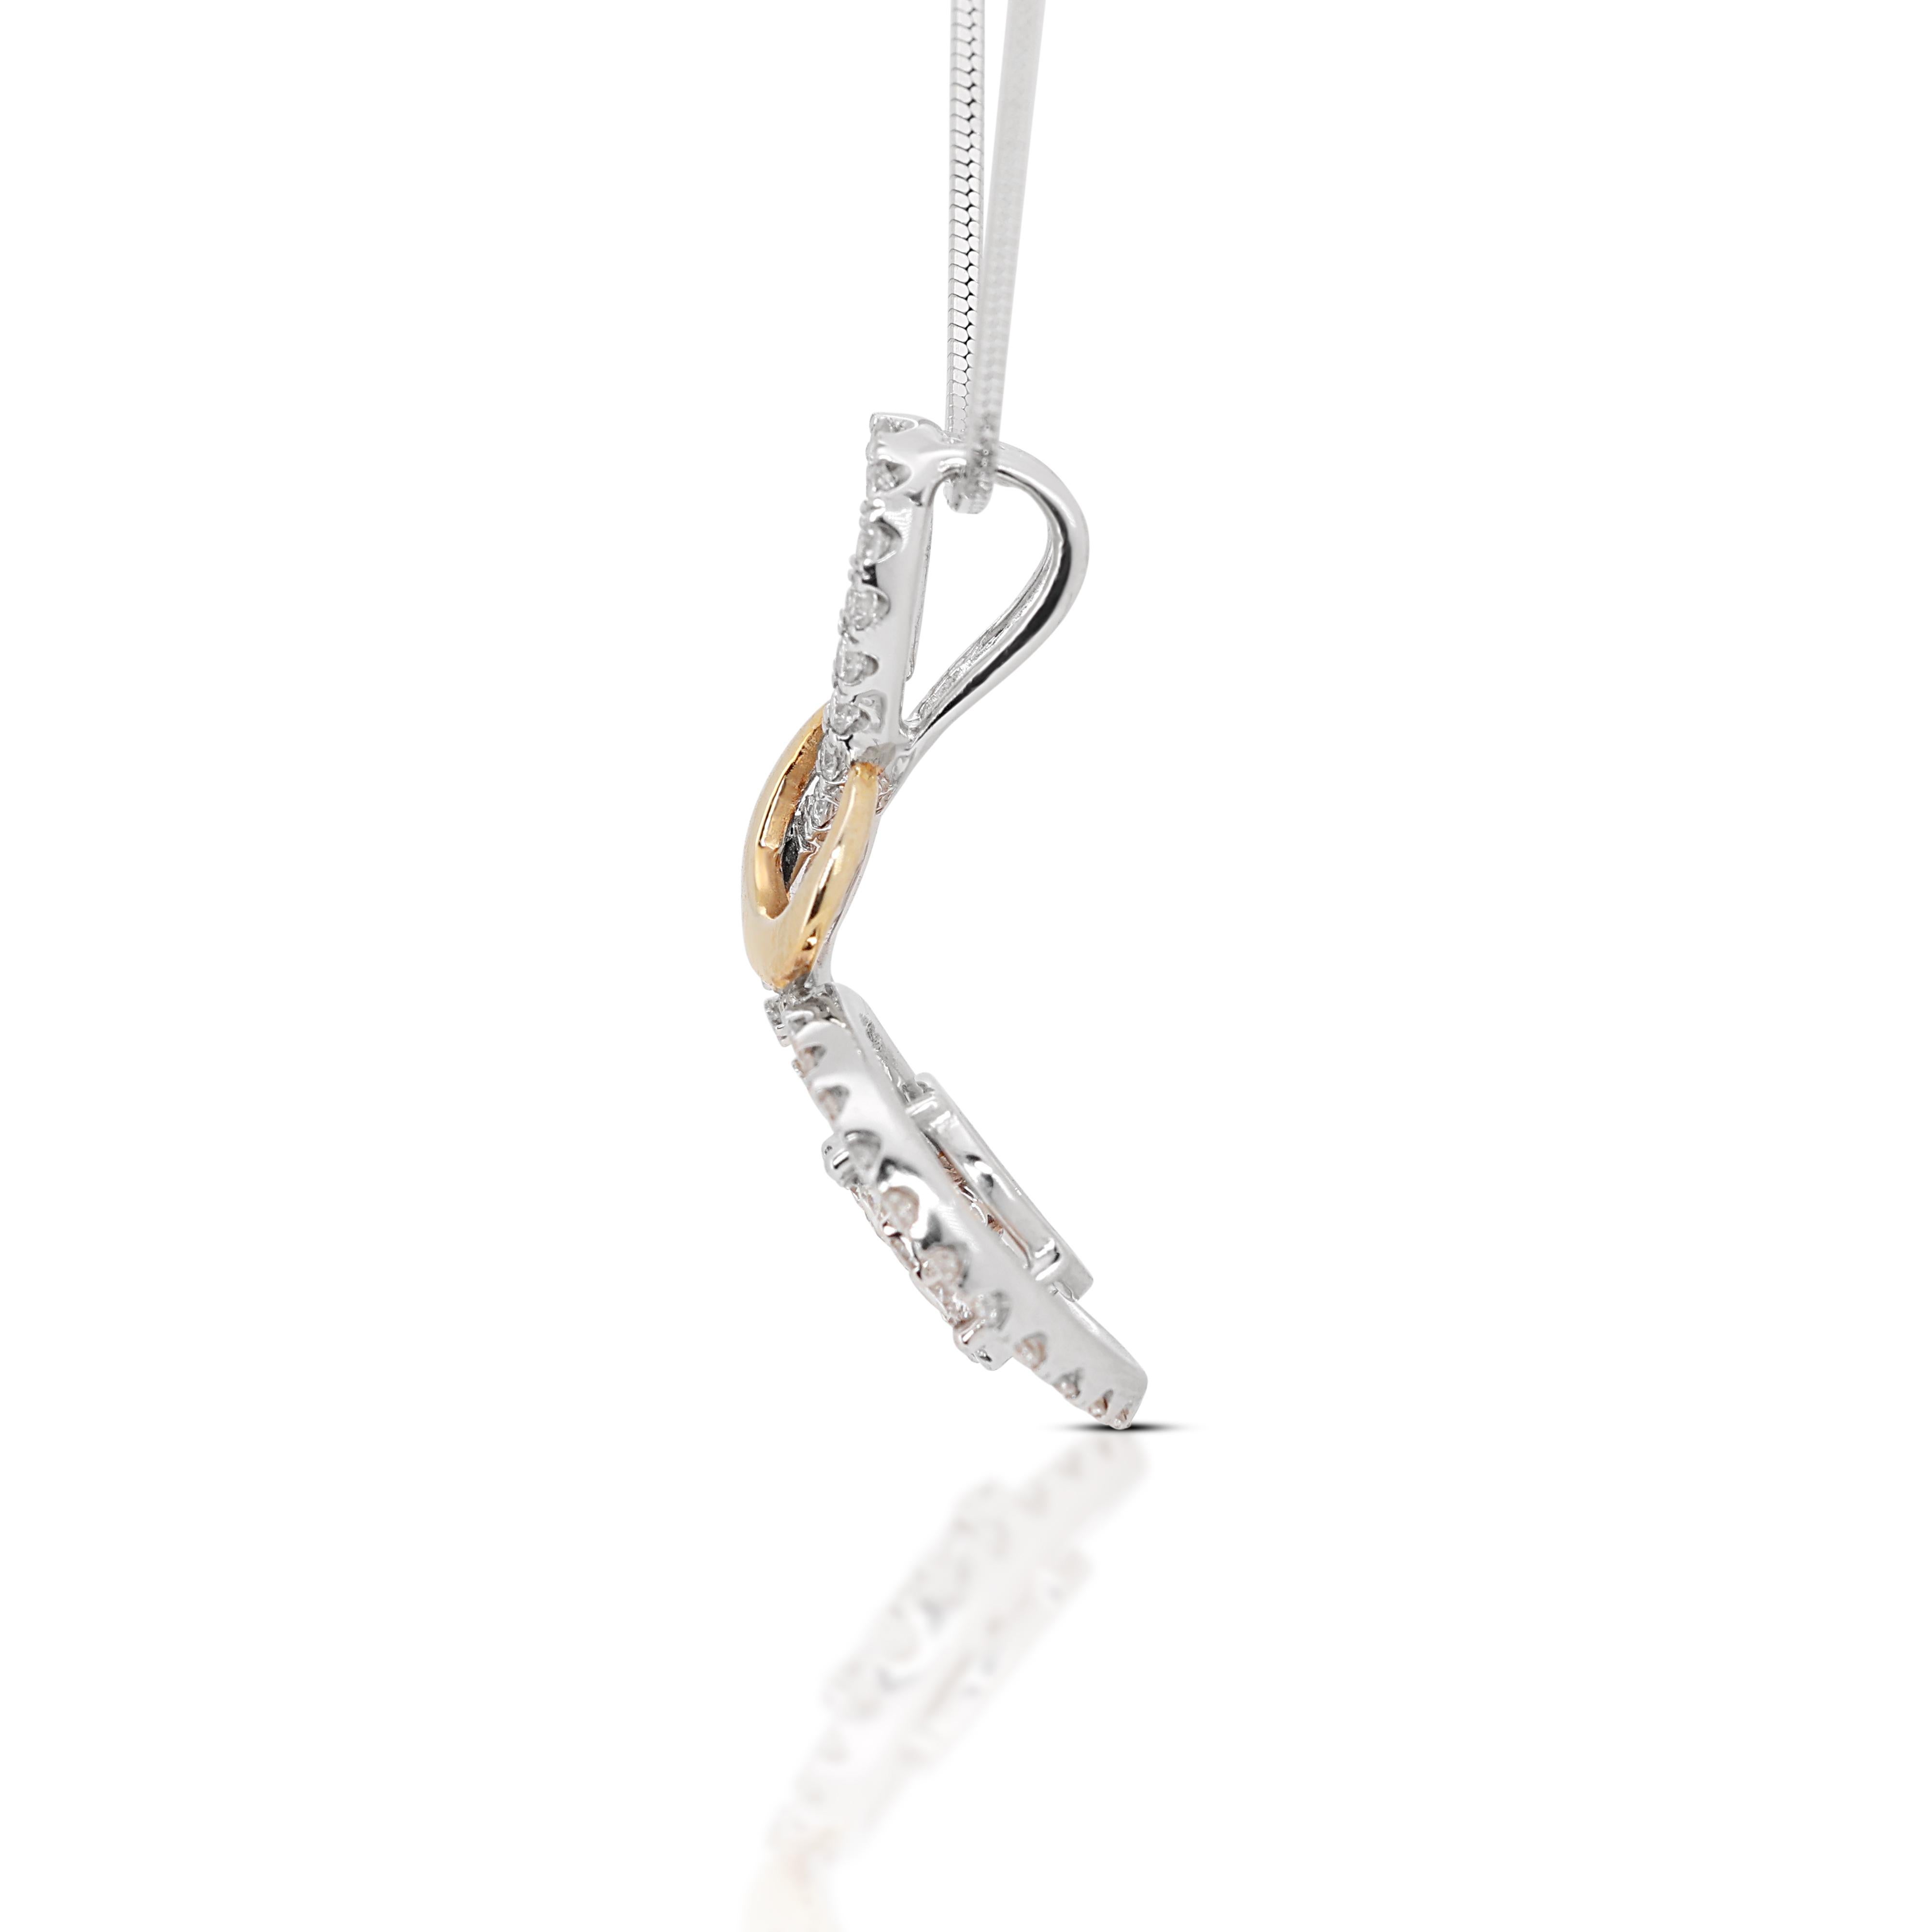 Stunning 0.50ct Diamond Pendant in 18K Bi-Color Gold (Chain Included) For Sale 1